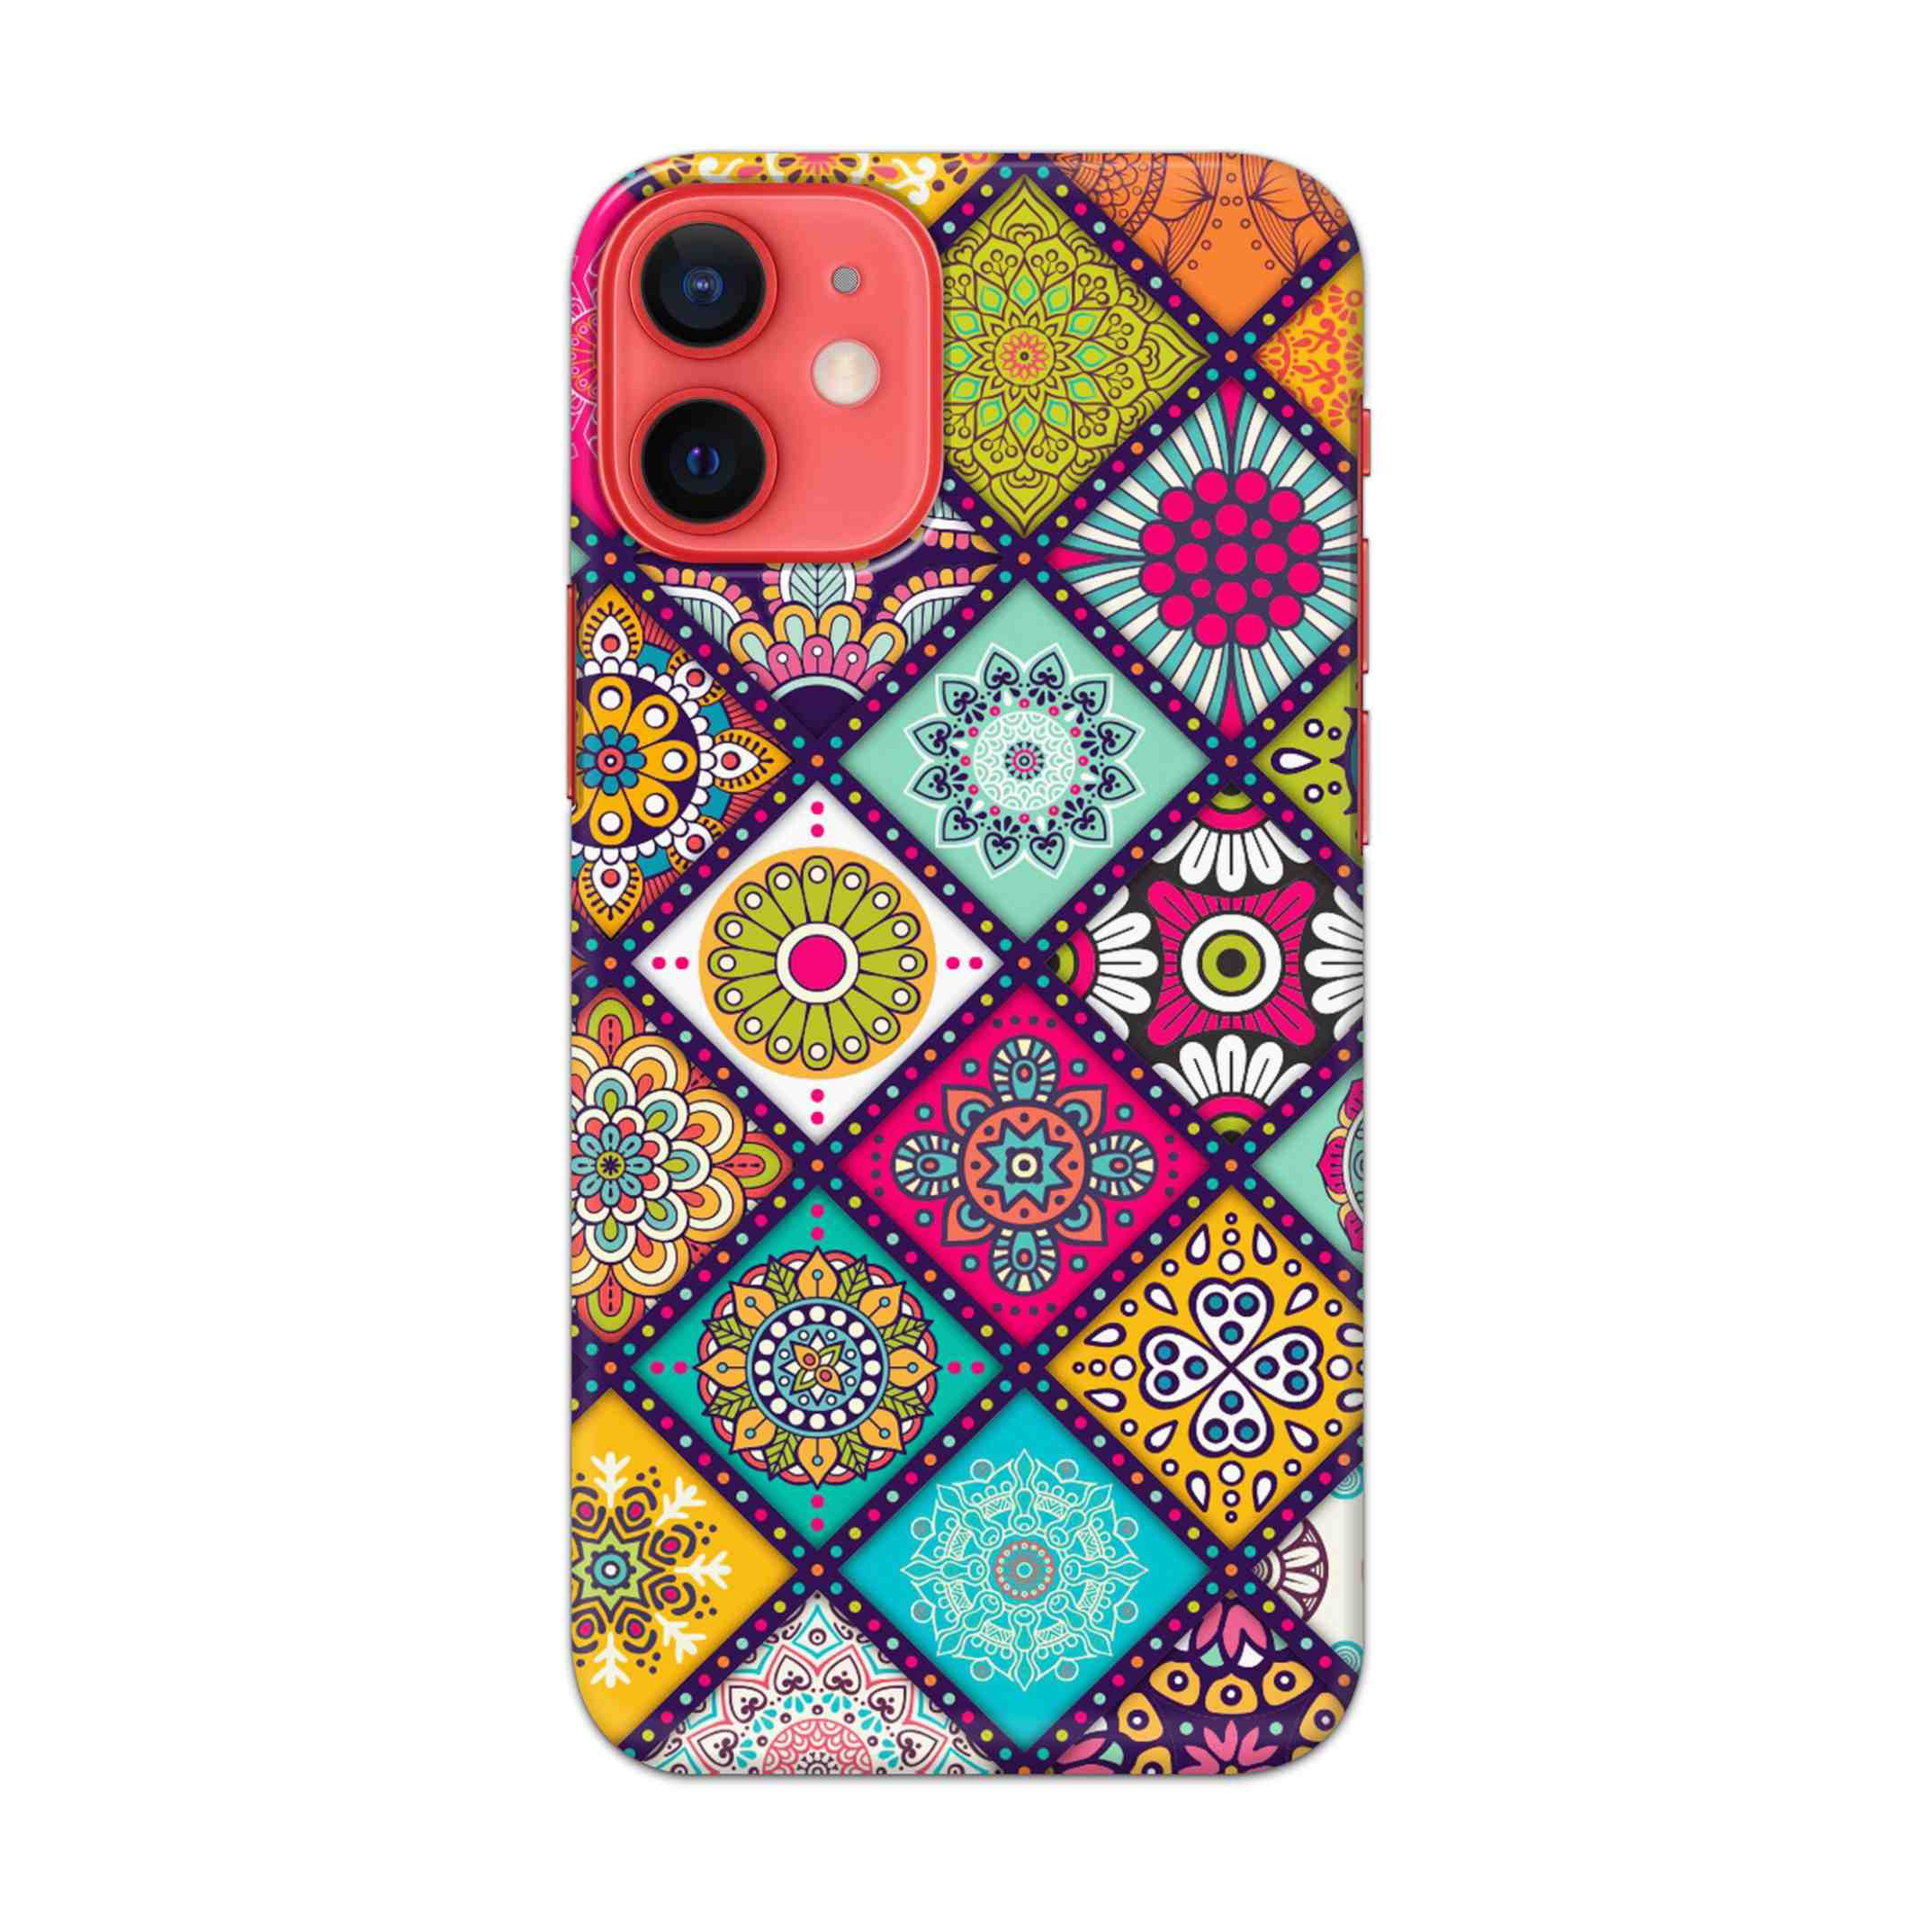 Buy Mandala Texture Hard Back Mobile Phone Case Cover For Apple iPhone 12 Online